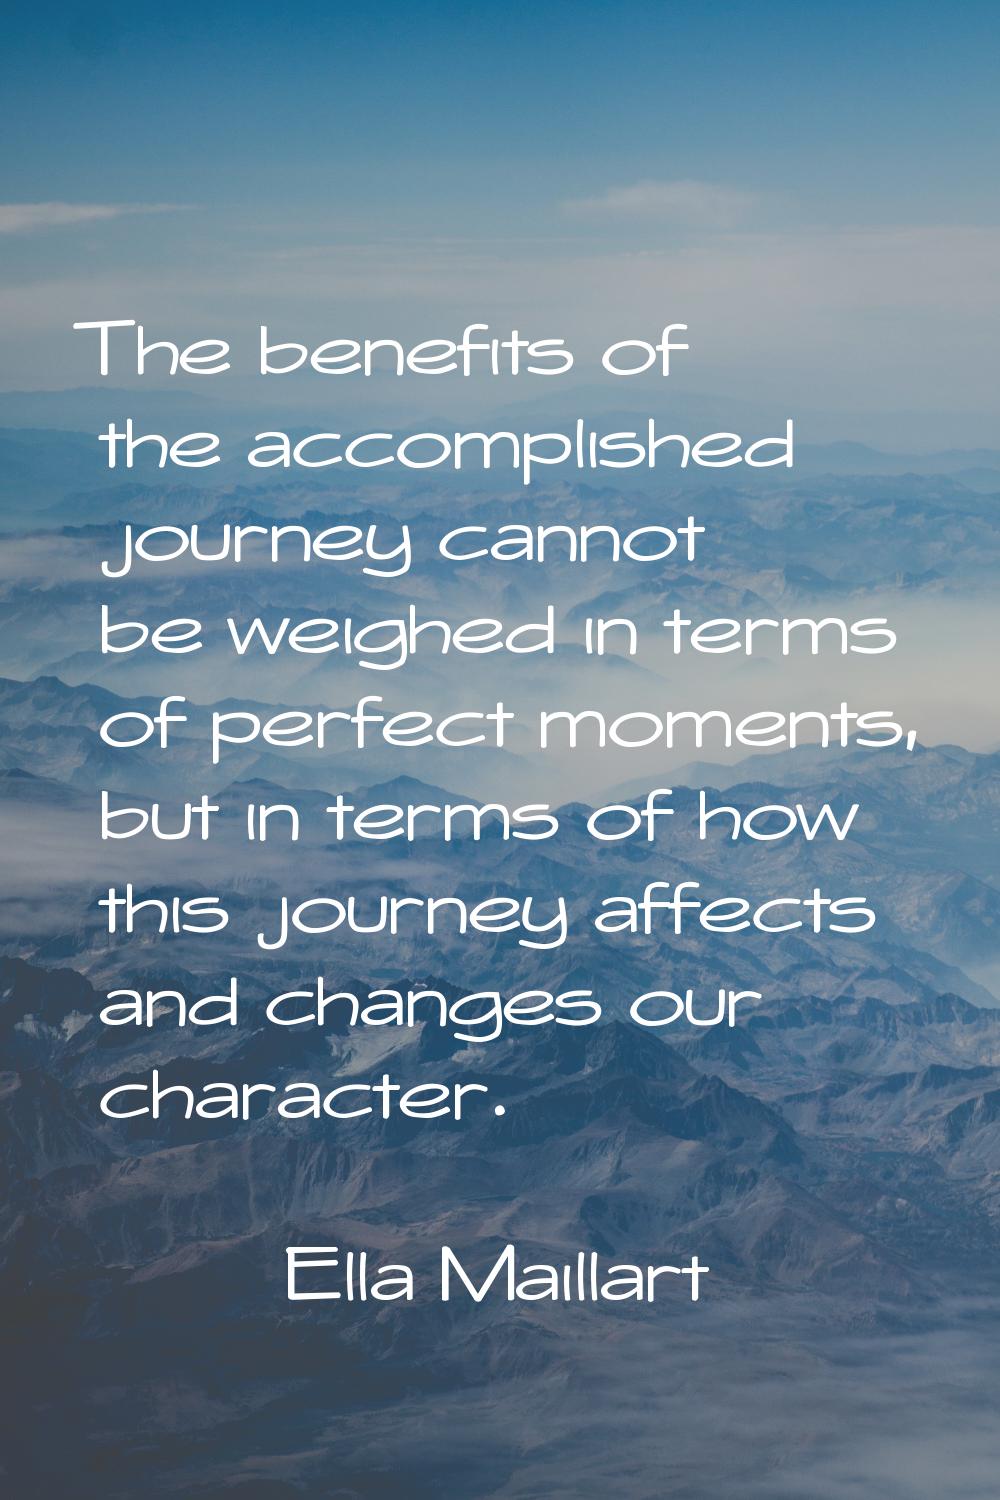 The benefits of the accomplished journey cannot be weighed in terms of perfect moments, but in term